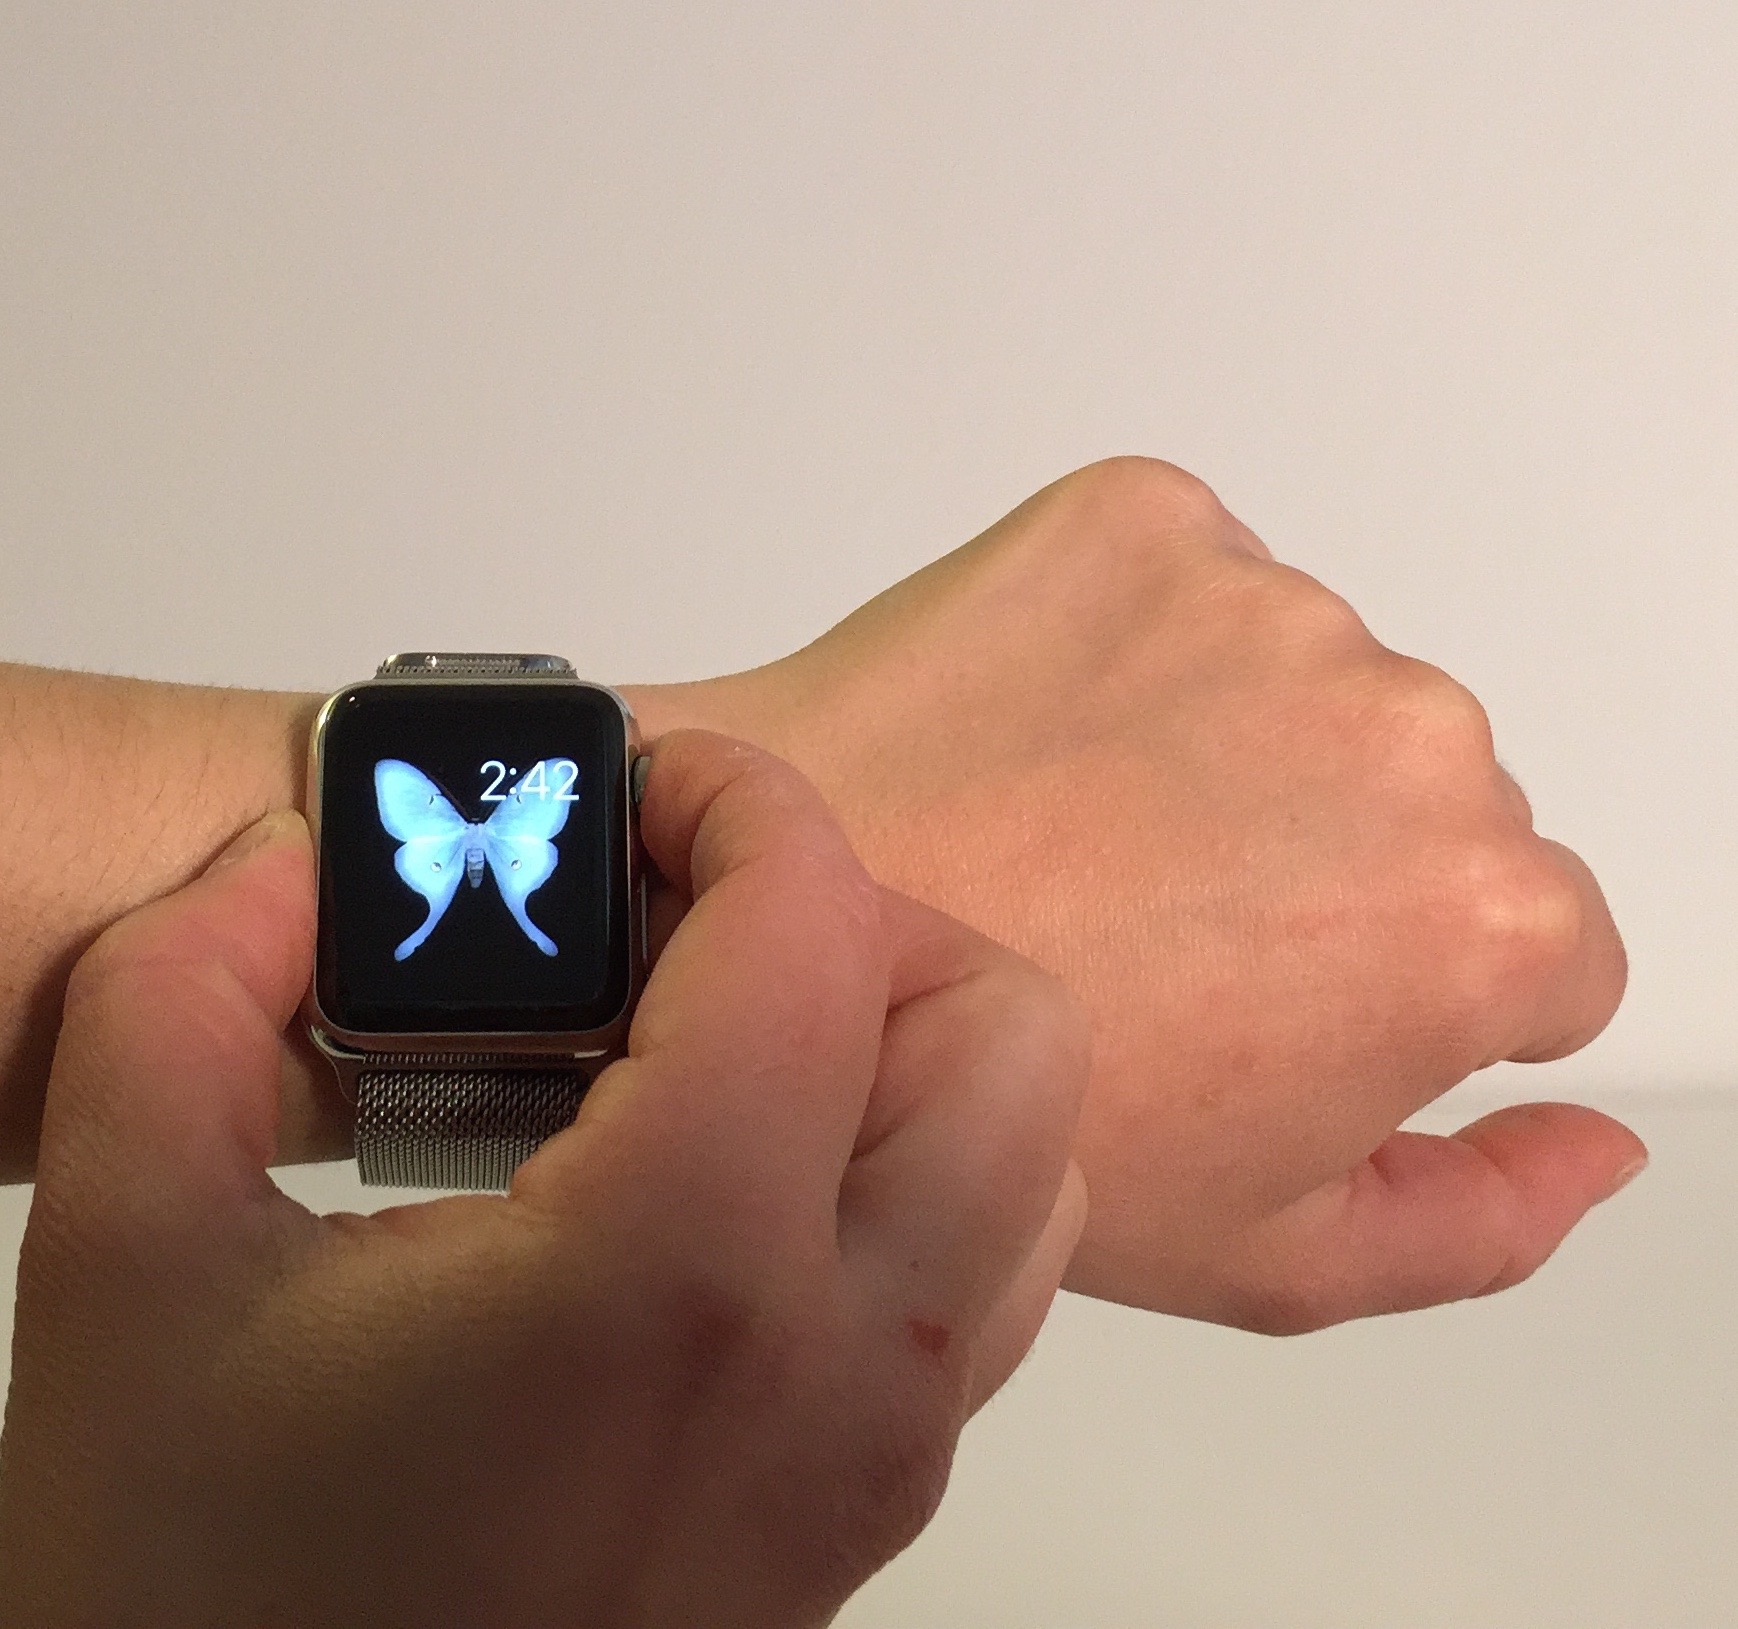 Apple Watch How-To: Take and share screenshots from your Apple Watch